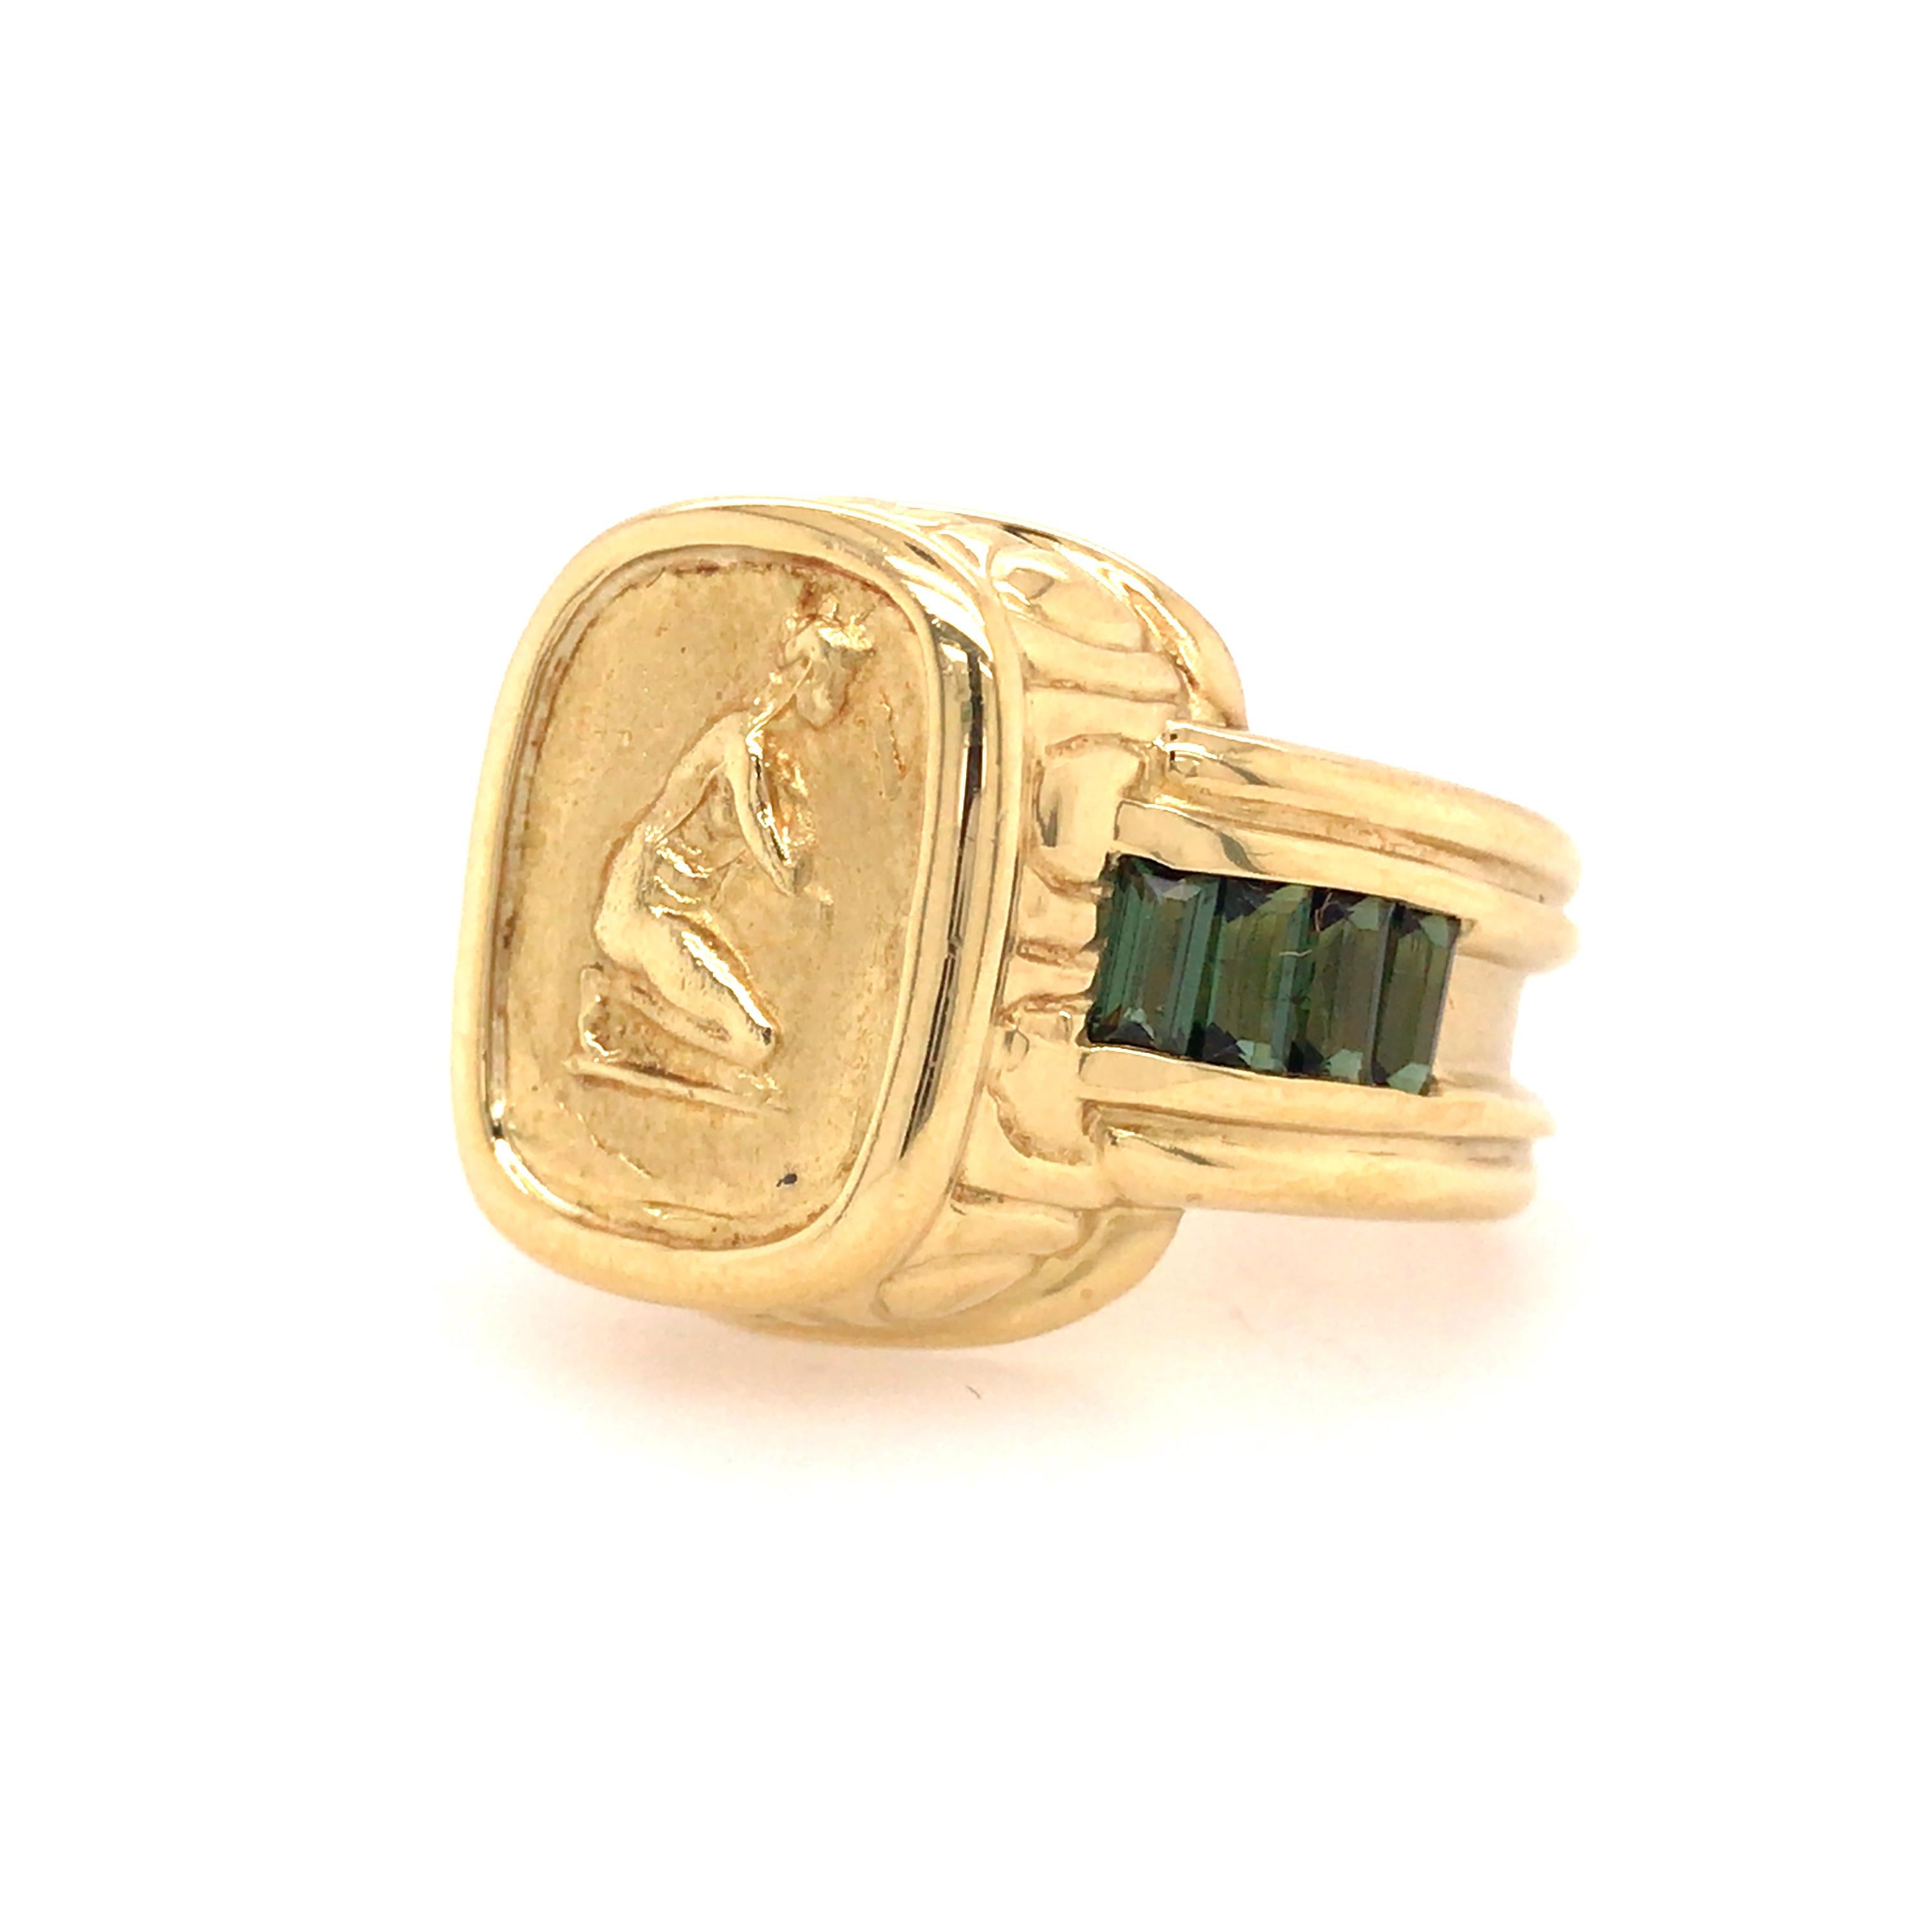 Seidengang 18K Yellow Gold Tourmaline Signet Ring.  (8) Tourmaline Baguette Gemstones weighing 1 carat total weight are expertly set.  The Ring measures 5/8 inch in length and 1/2 inch in width.  Ring size 7.  17.88 grams. Signed.